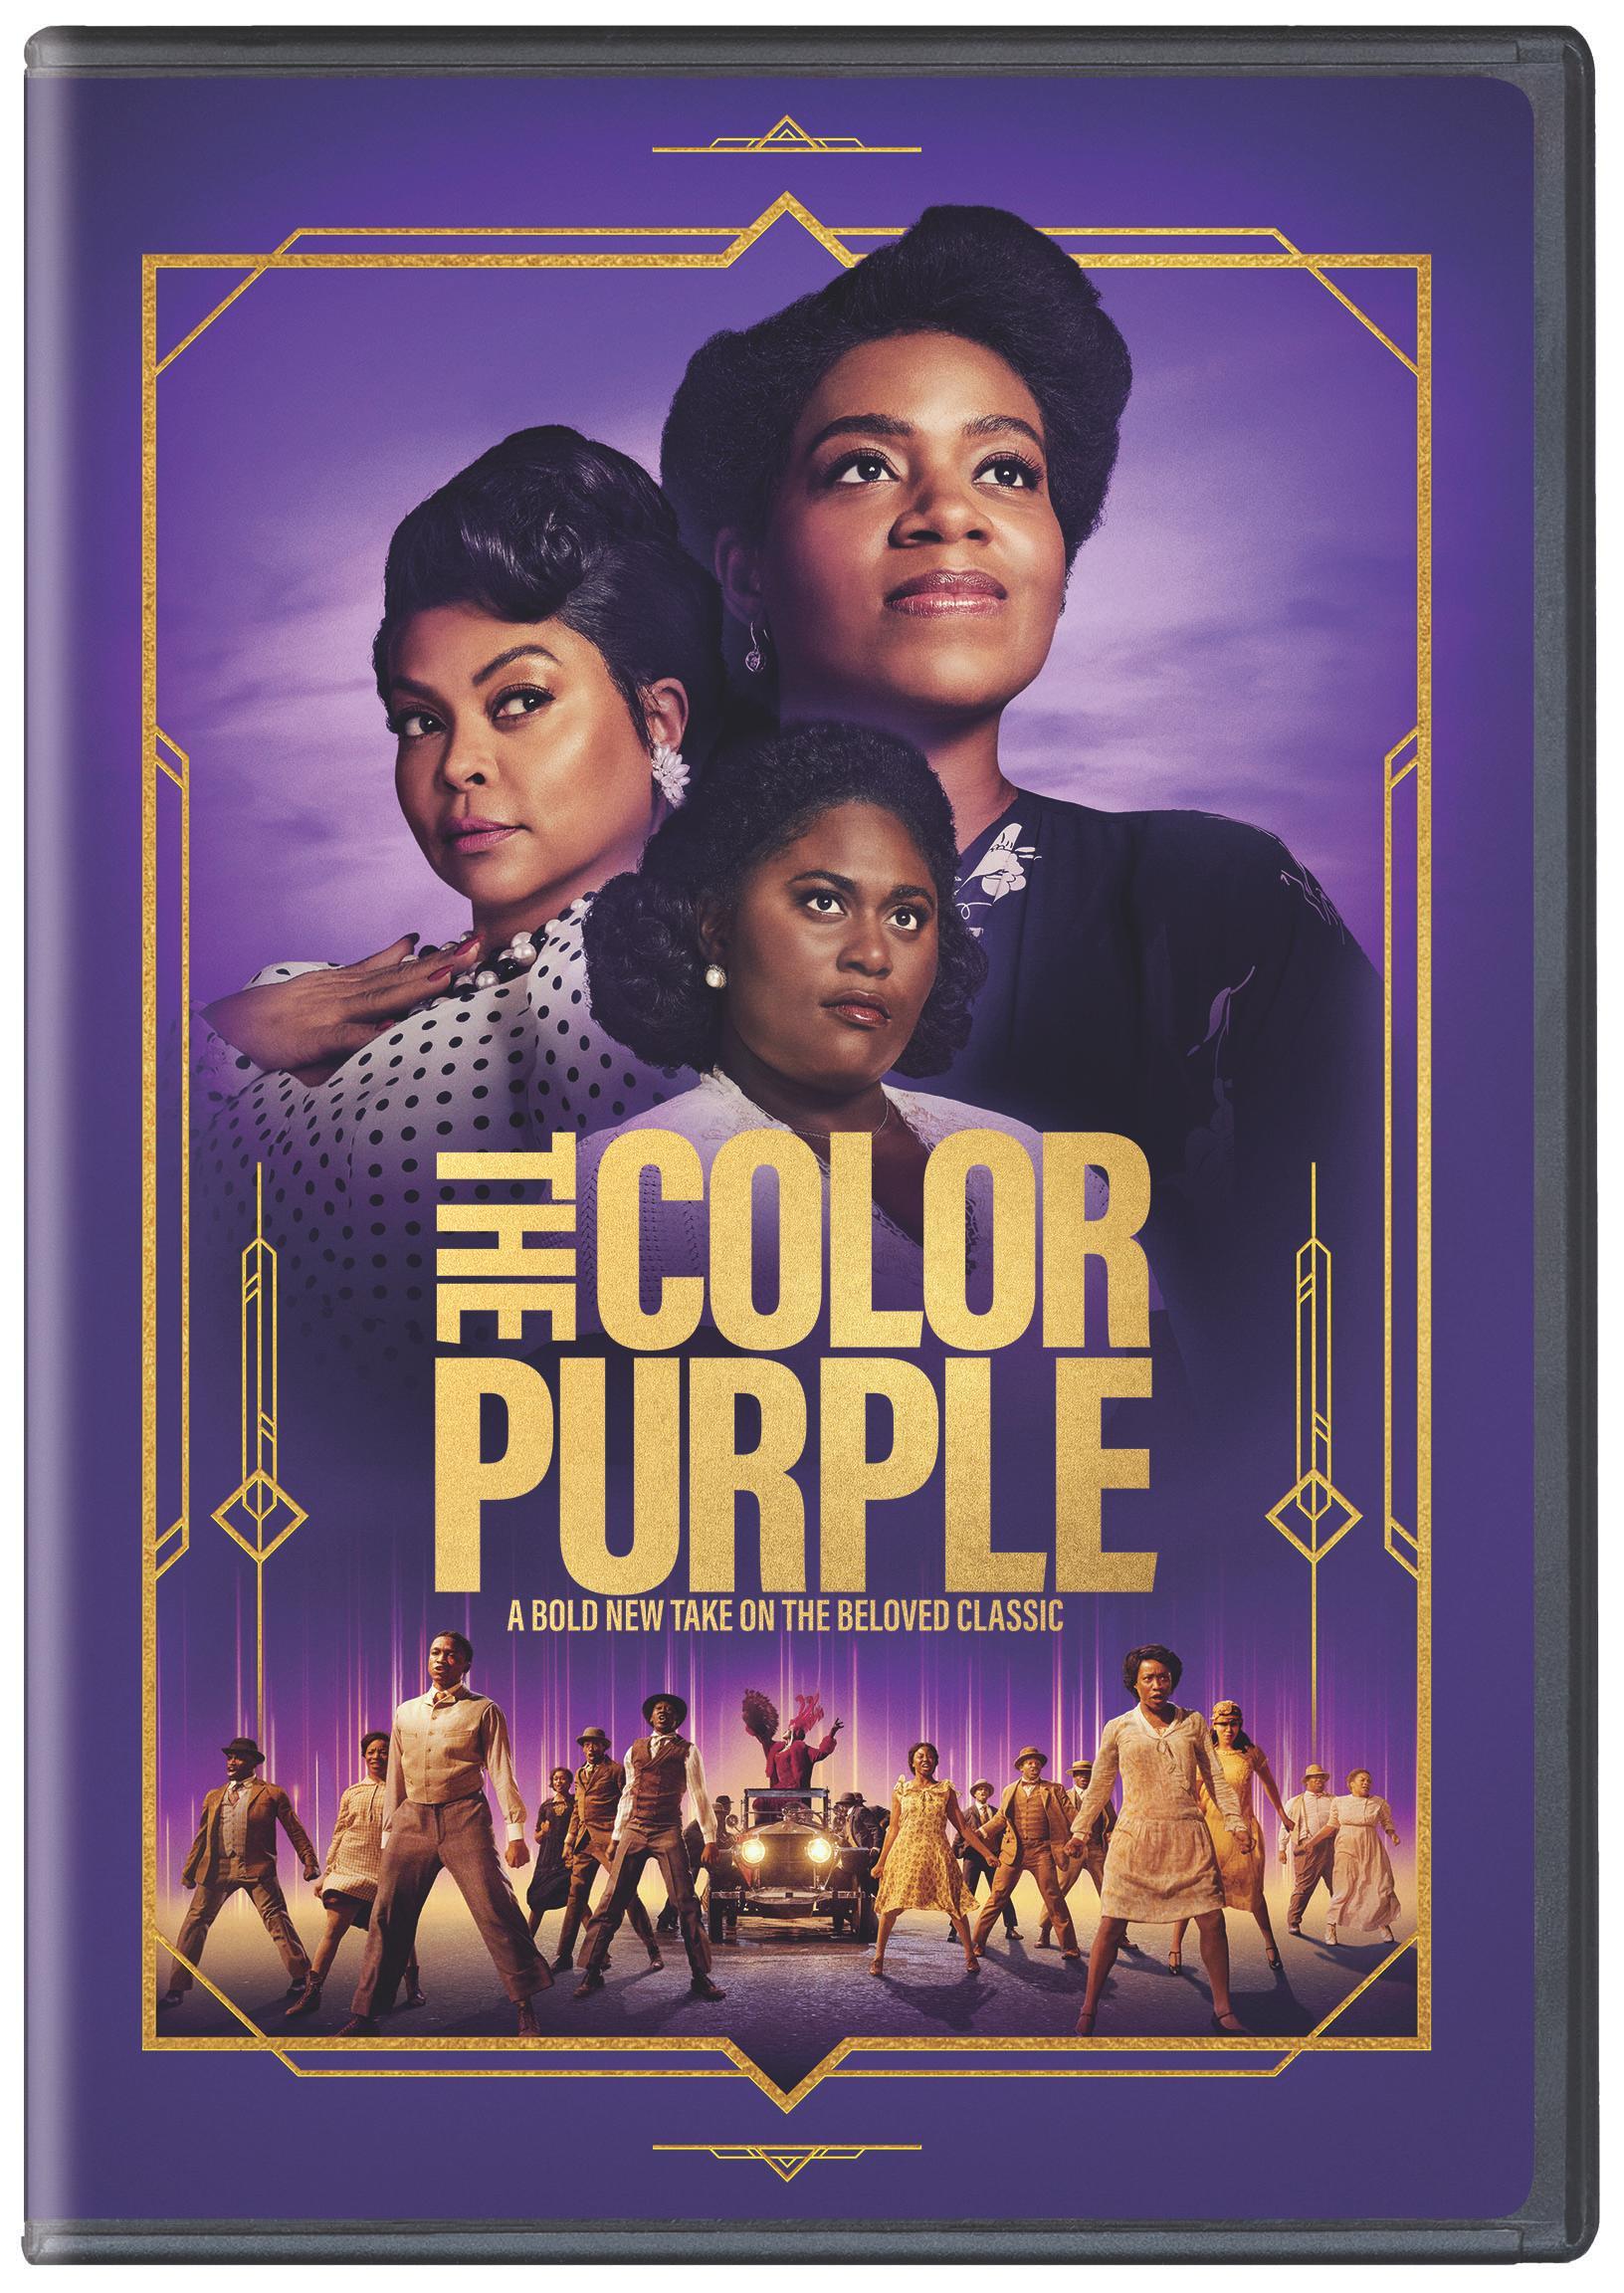 The Color Purple - DVD   - Musical Movies On DVD - Movies On GRUV